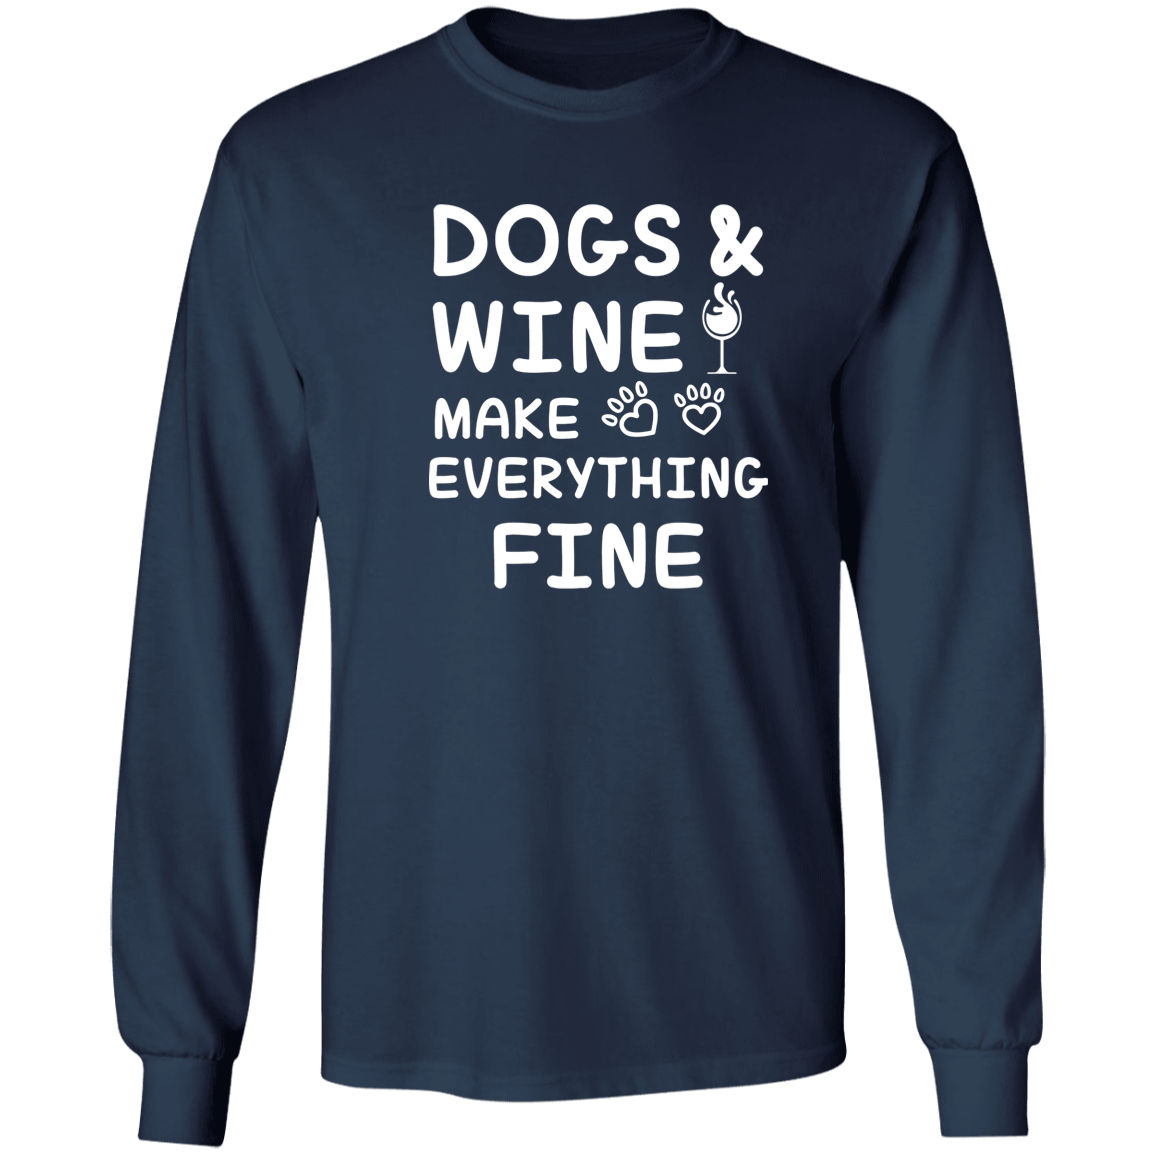 Dogs And Wine Make Everything Fine - Long Sleeve T Shirt.